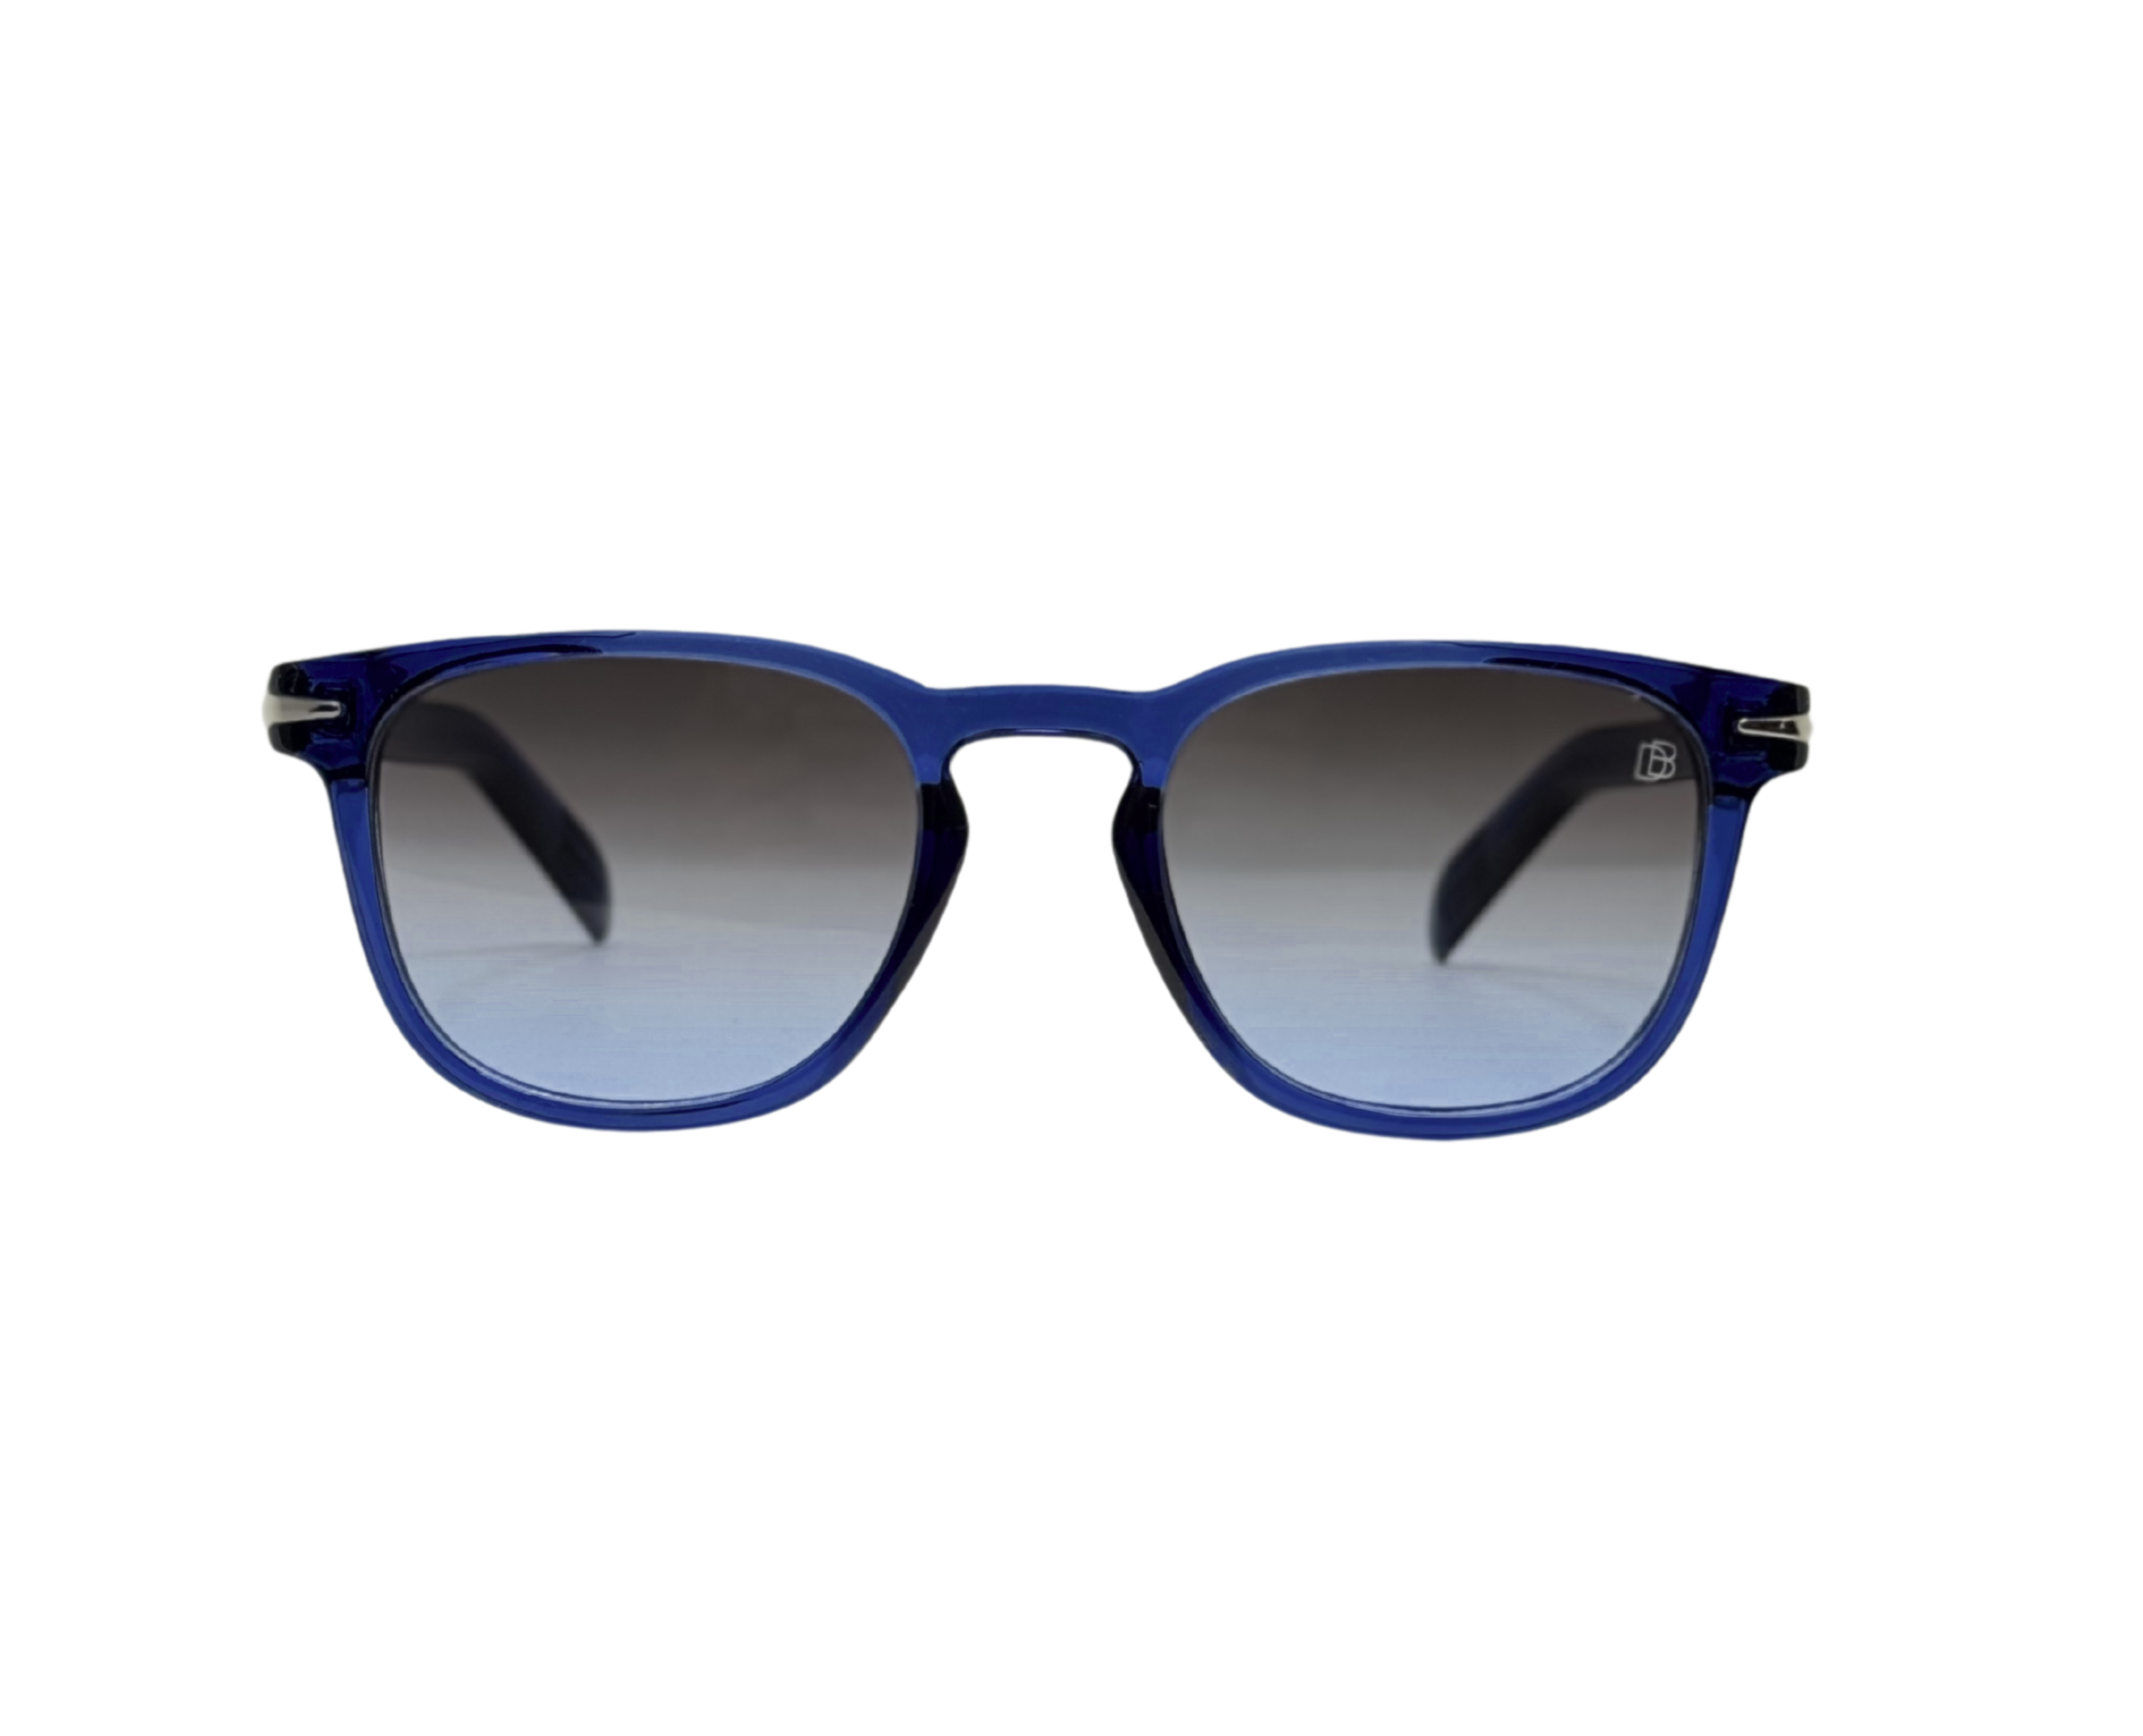 NS Deluxe - 7086 - Blue - Sunglasses